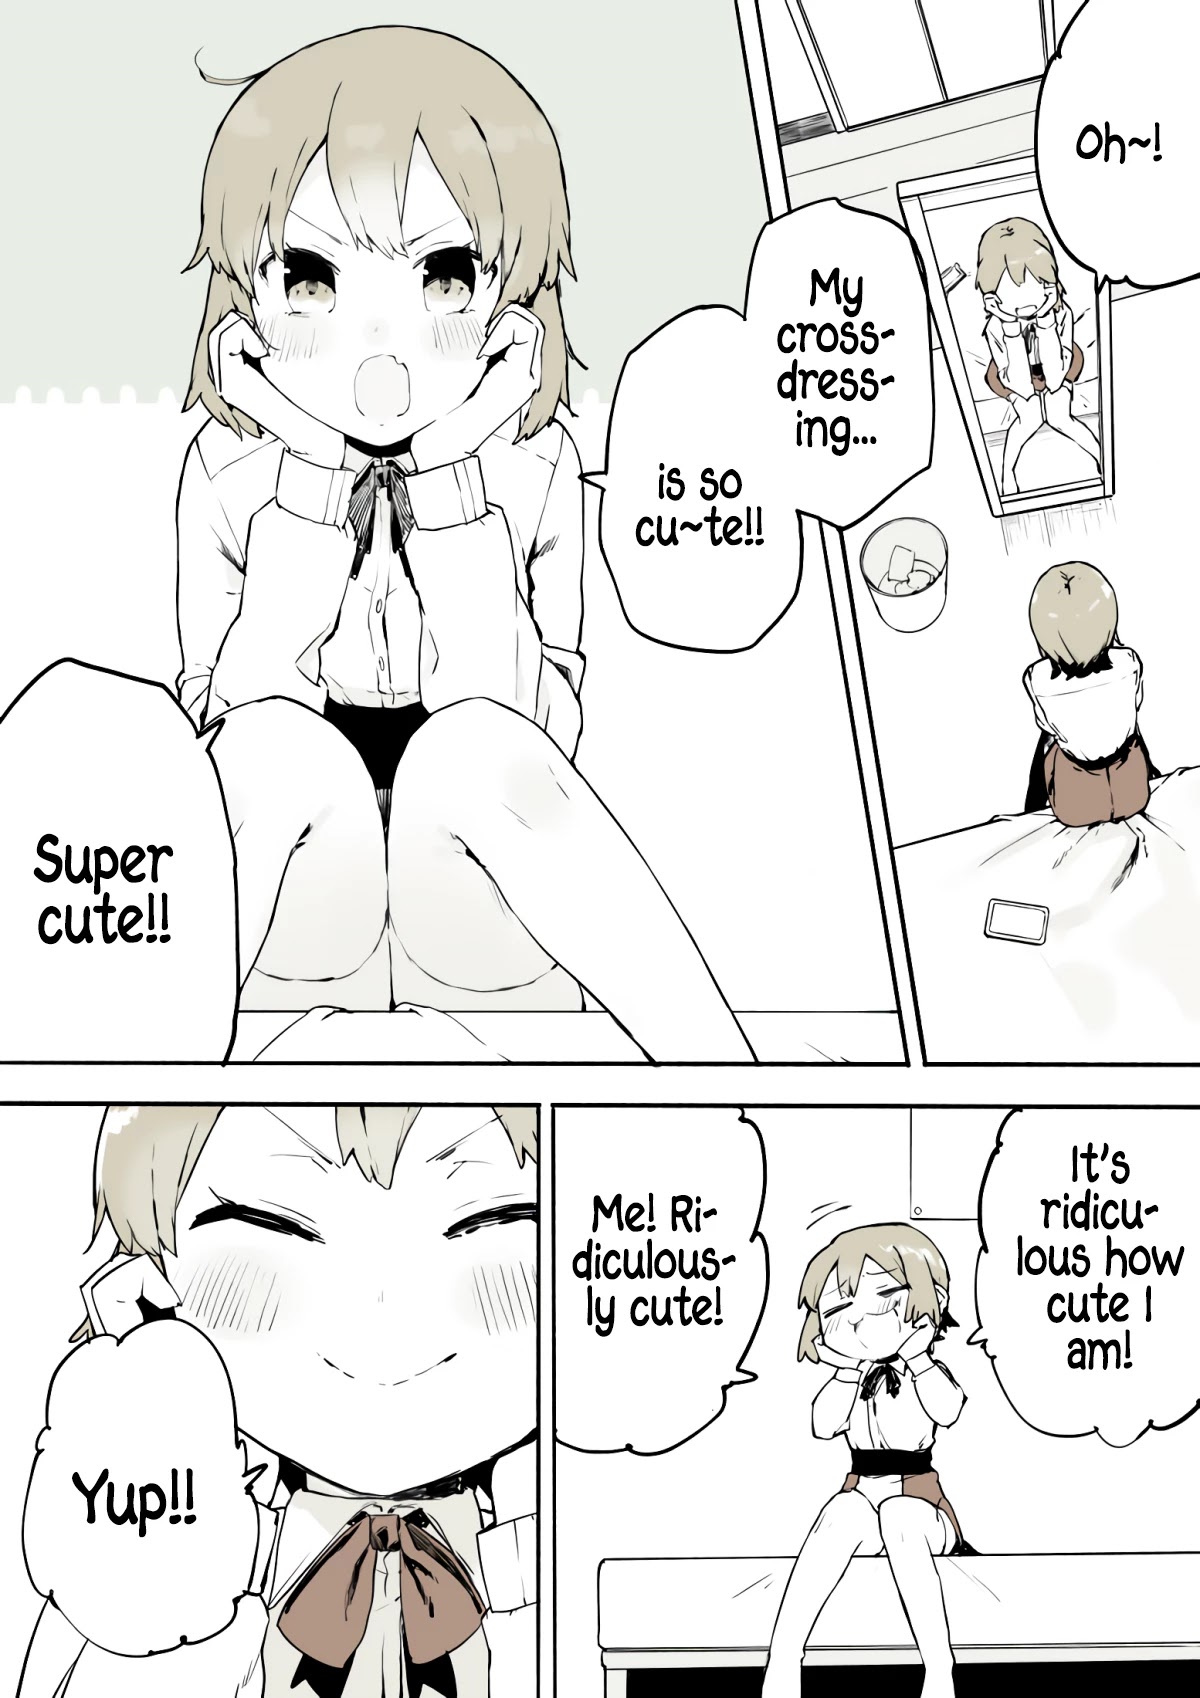 A Boy That Can't Stop Crossdressing - Page 1